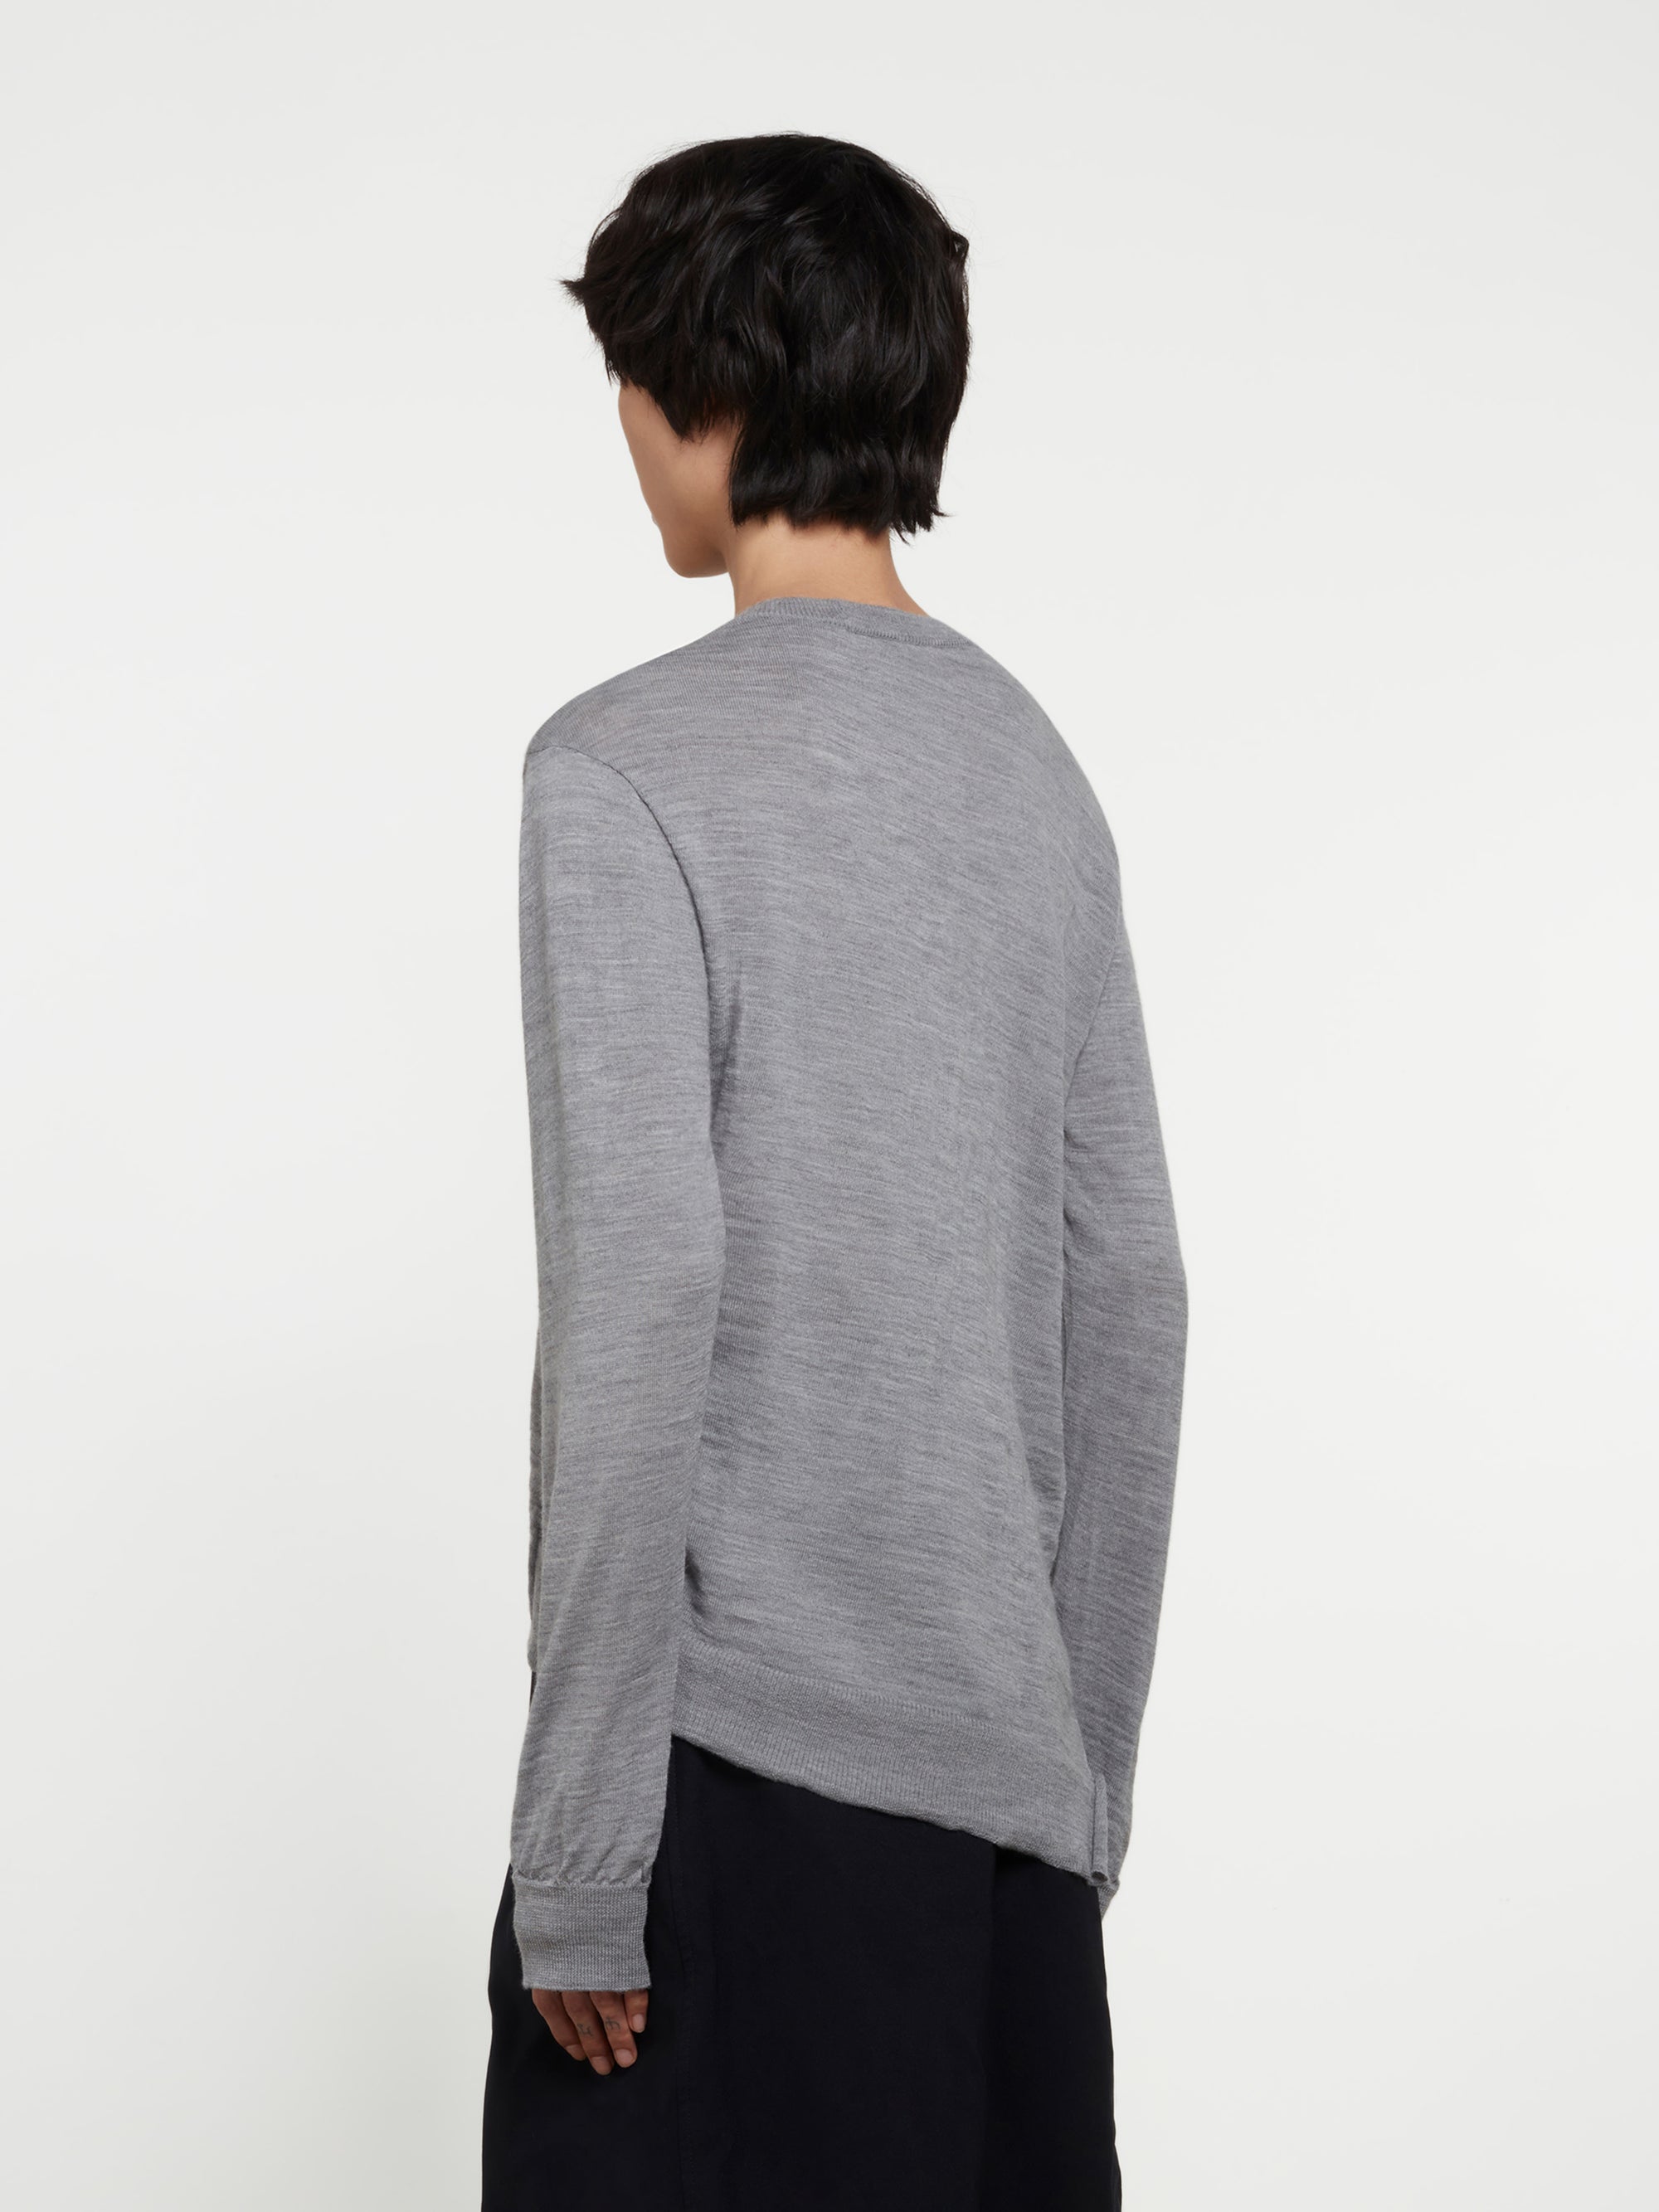 CDG Shirt - Lacoste Men’s Knit Sweater - (Grey) view 3